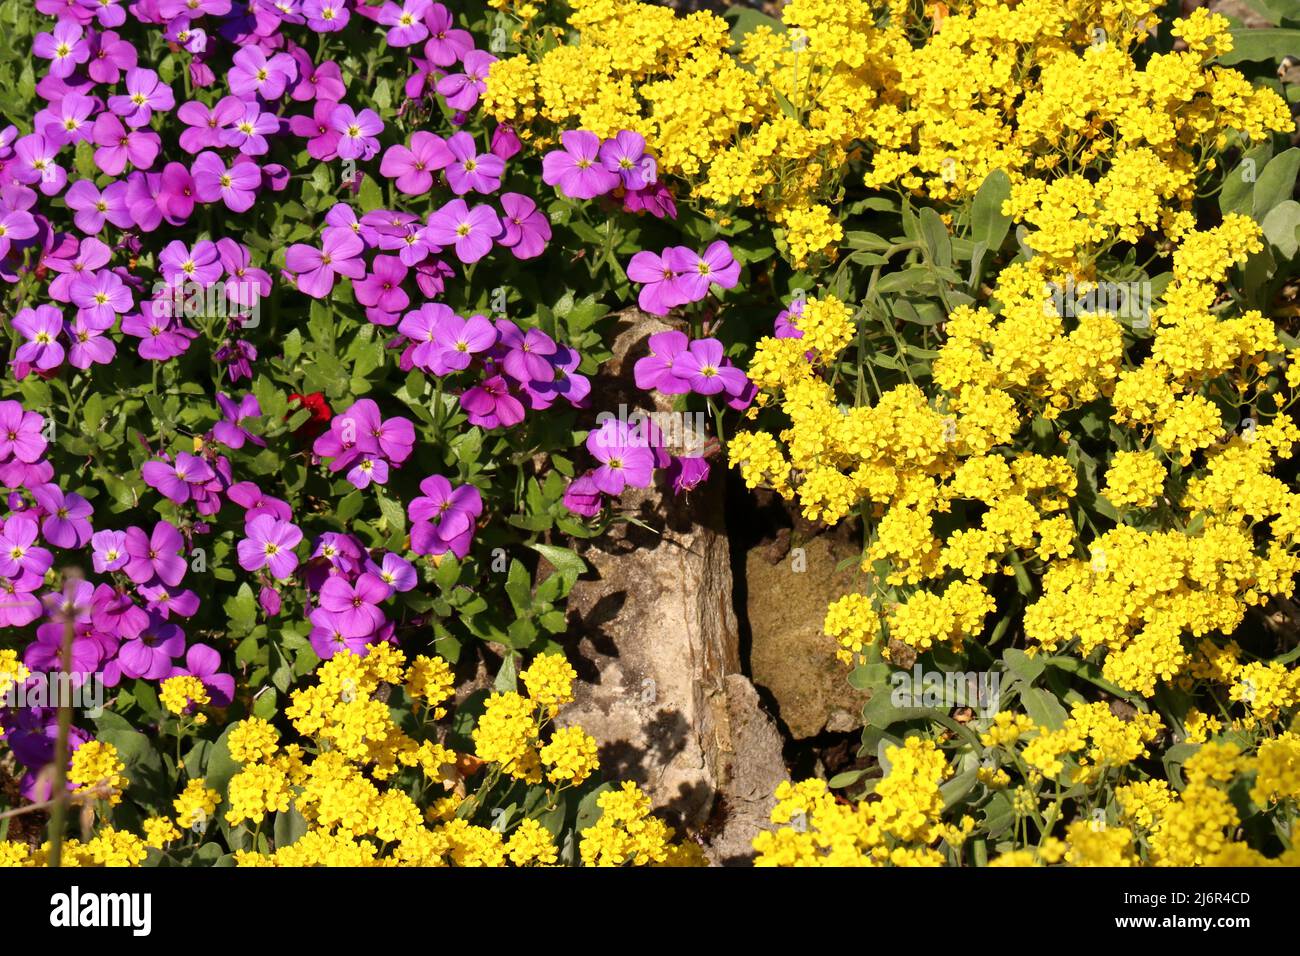 The lush flowers of purple aubrieta and yellow alyssum shine brightly in the sunlight, view from above Stock Photo